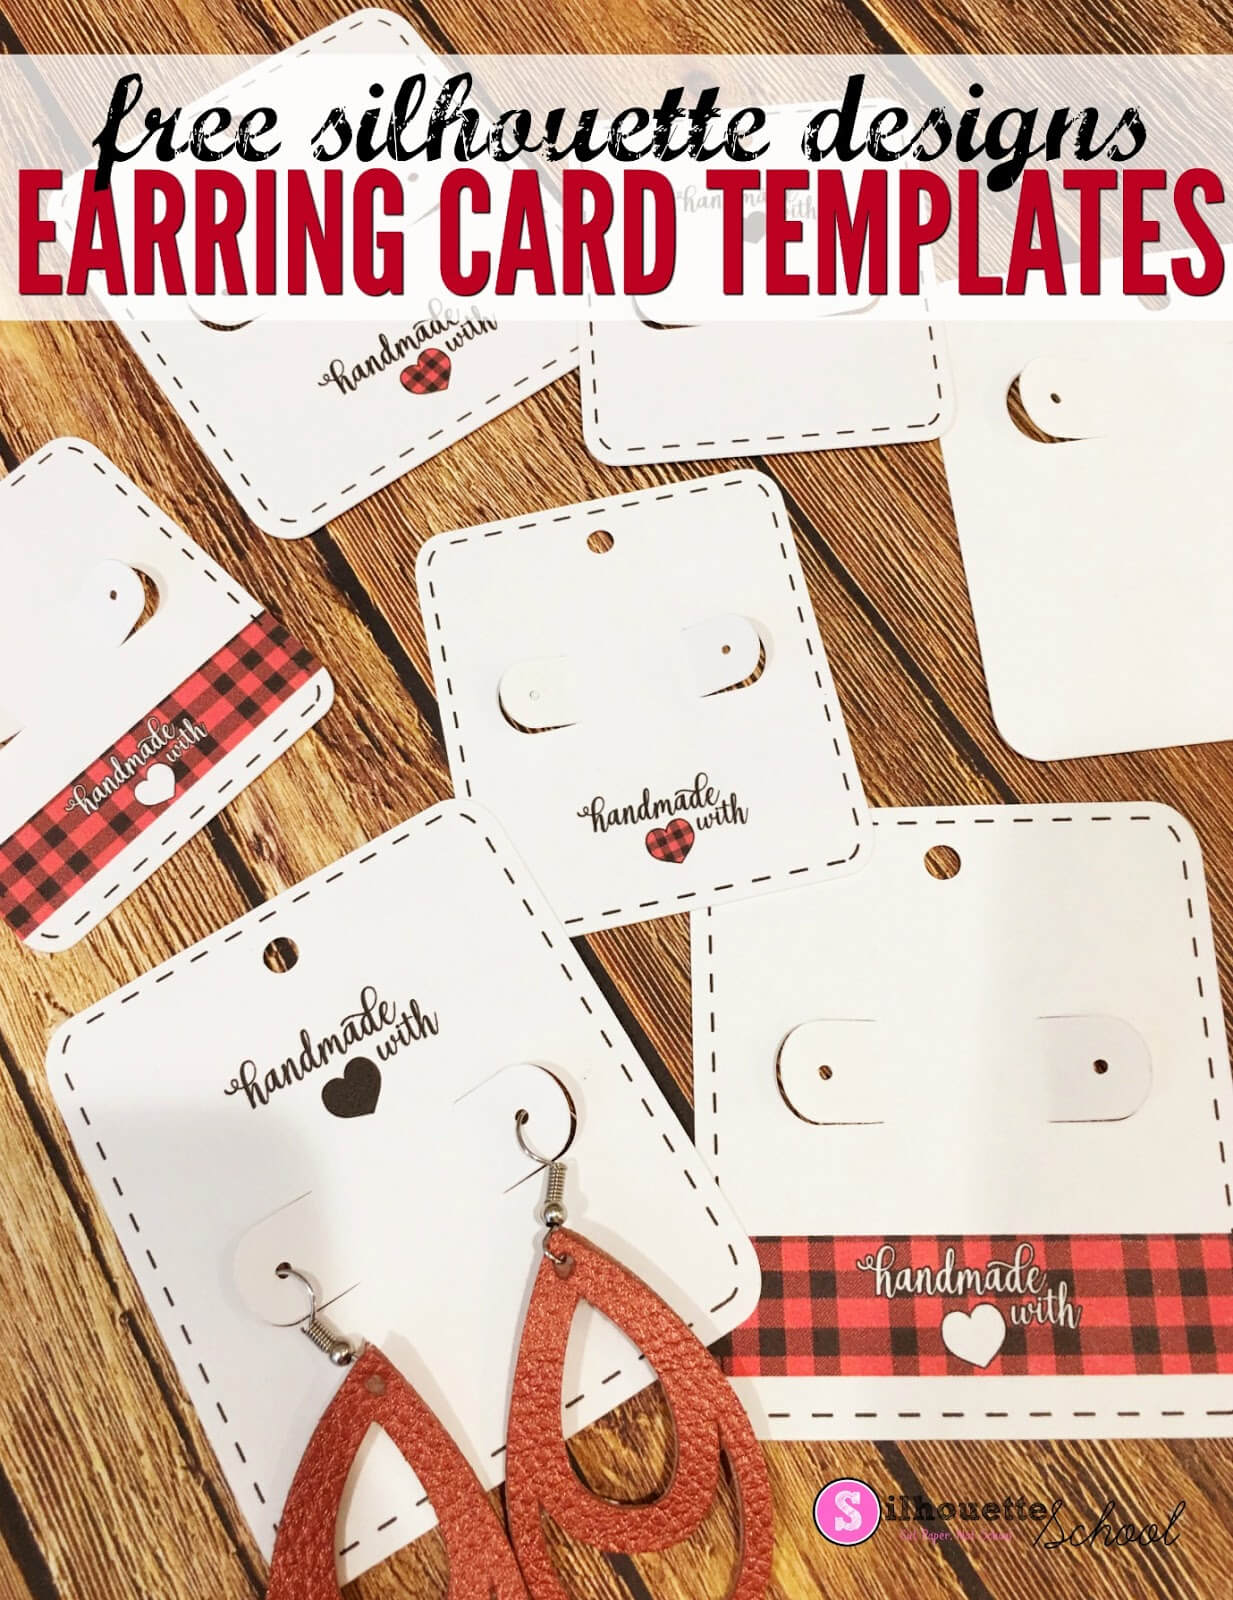 Free Silhouette Earring Card Templates (Set Of 8 Pertaining To Silhouette Cameo Card Templates